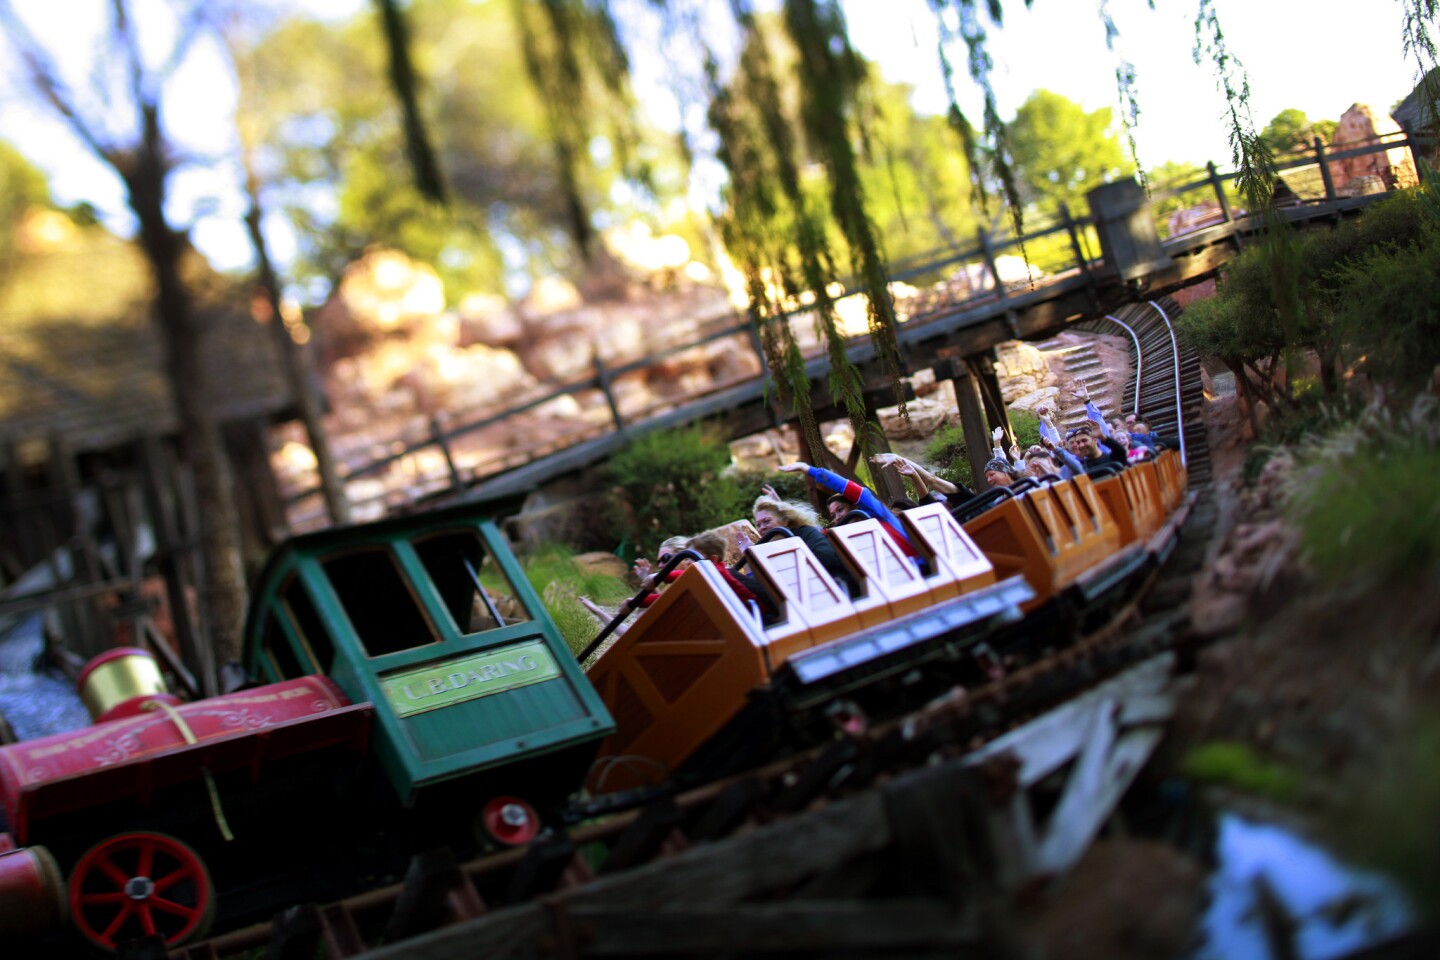 Big Thunder Mountain Railroad at Disneyland opened in 1979. It had 41 incidents of injury or ailment reported in 2007 through 2012. Source: California Department of Industrial Relations.